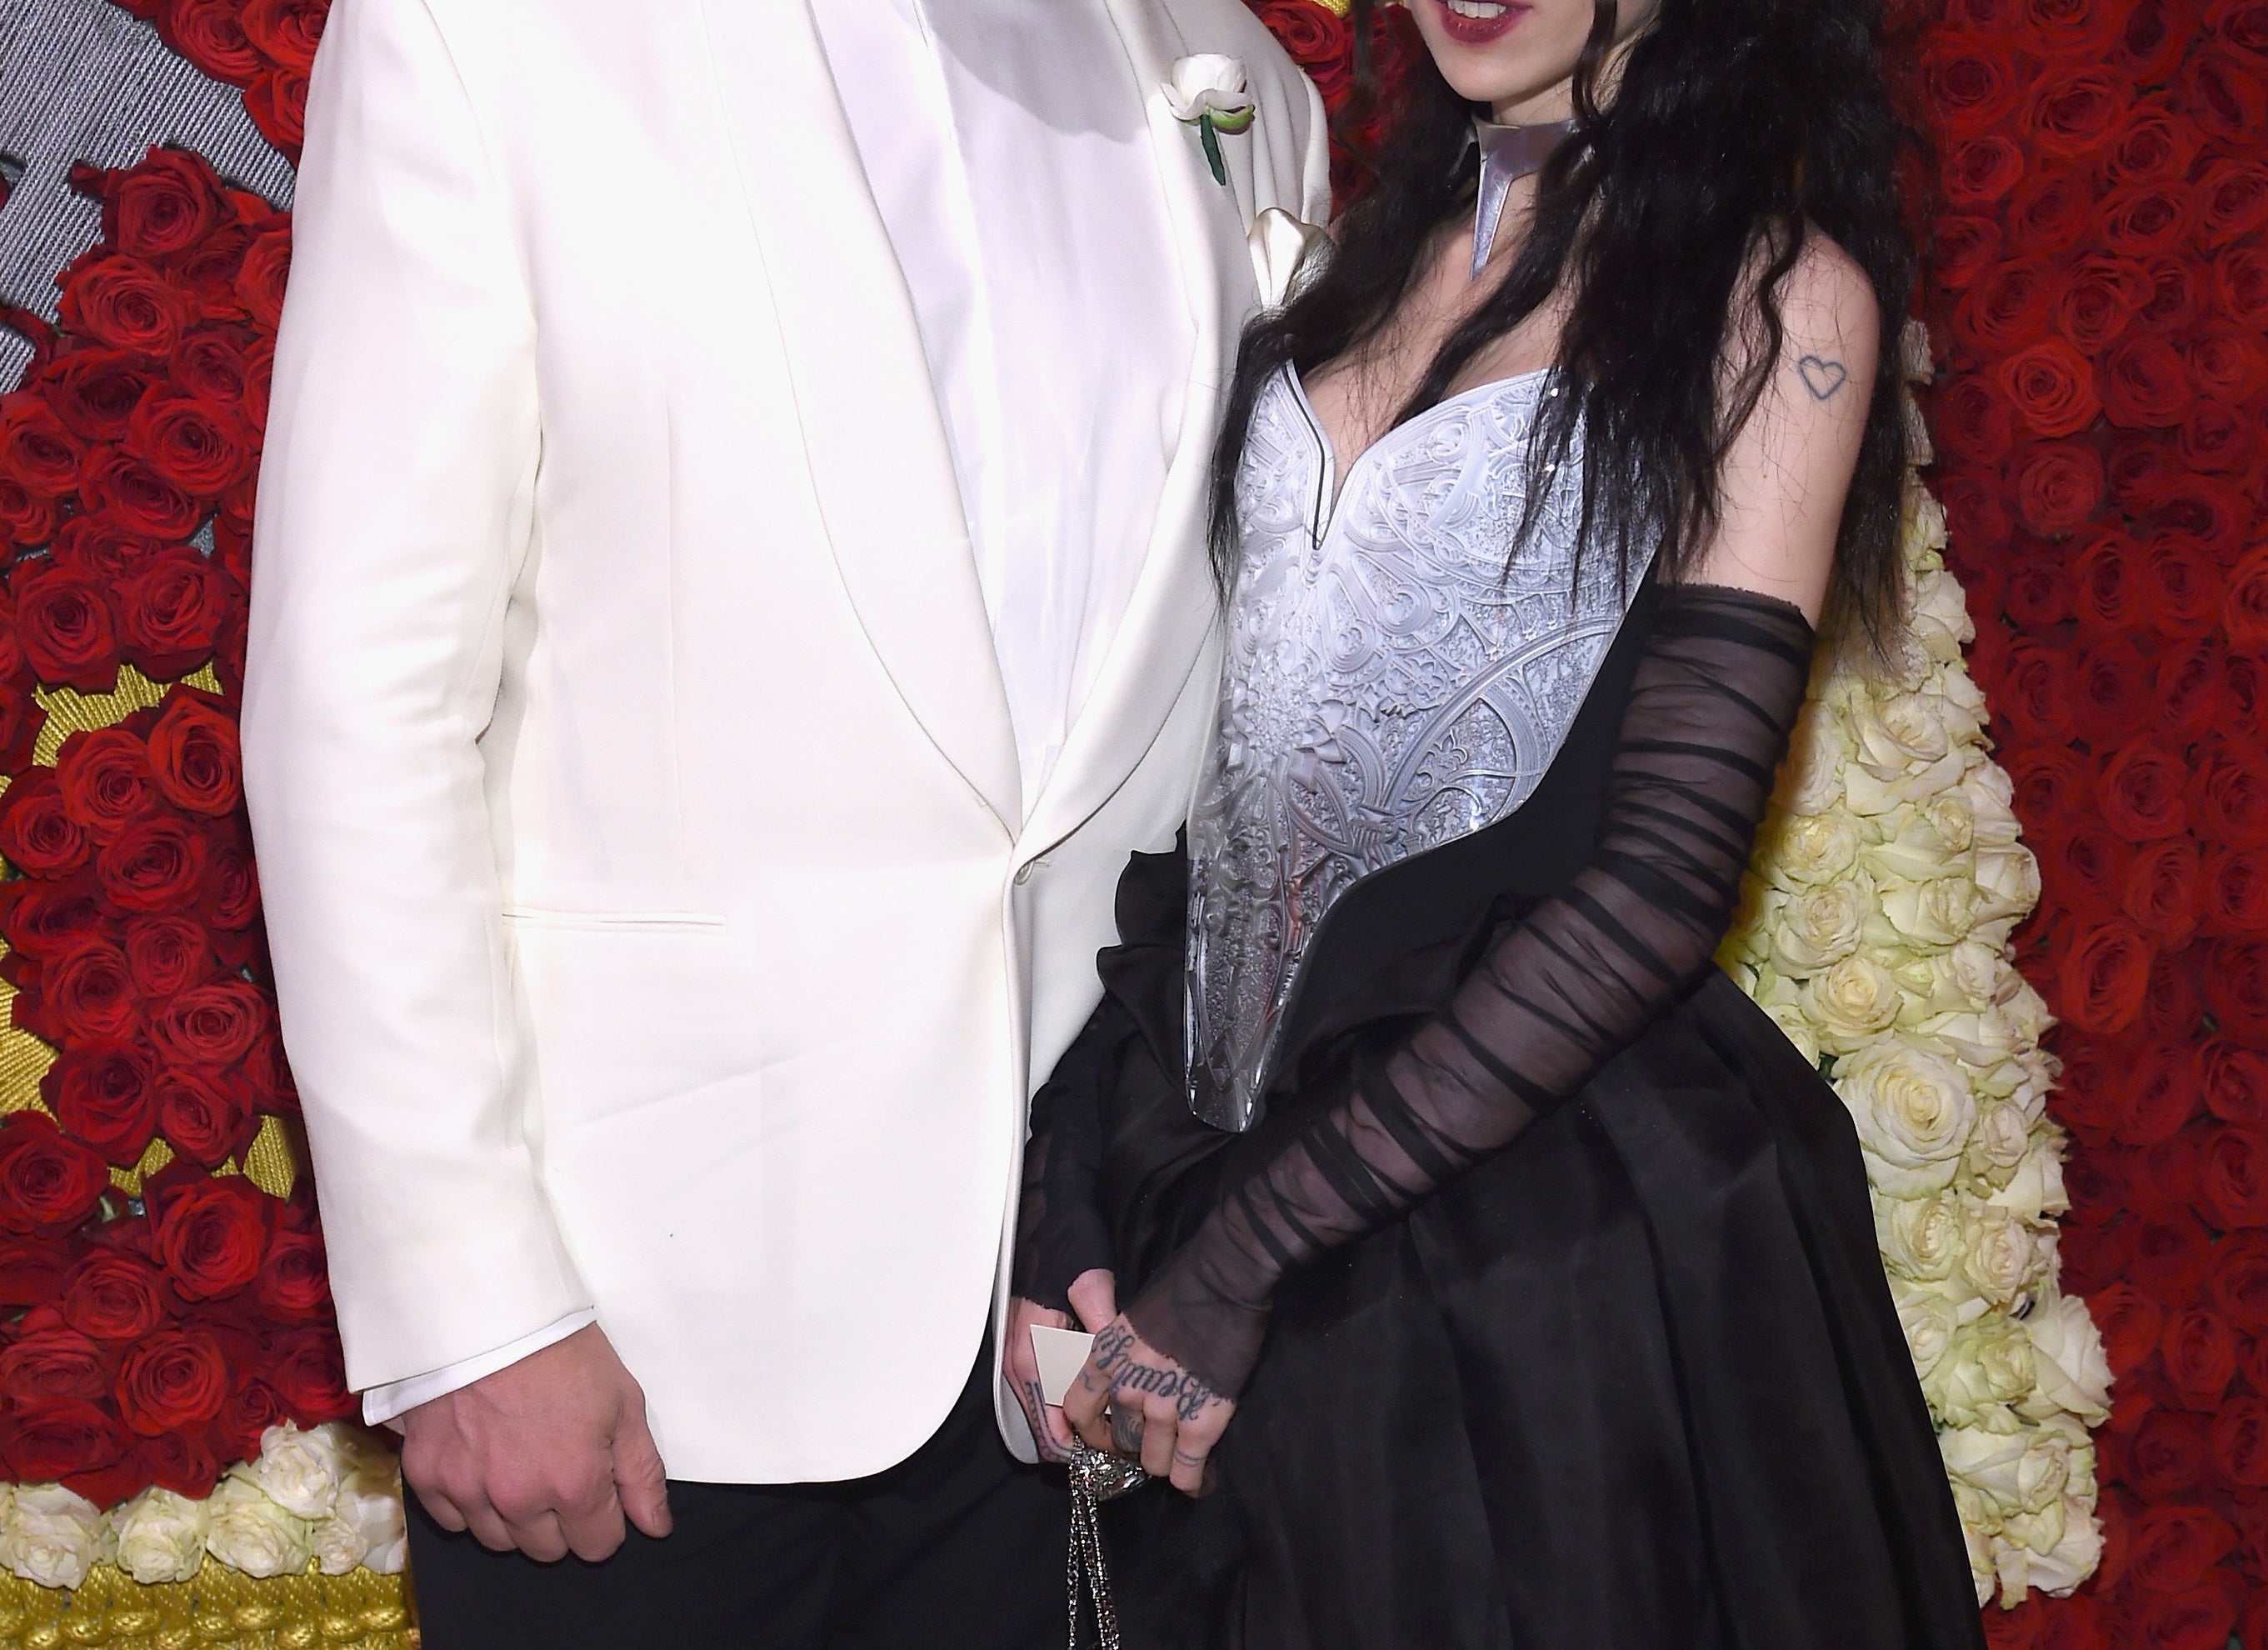 Grimes and Elon attend an event together